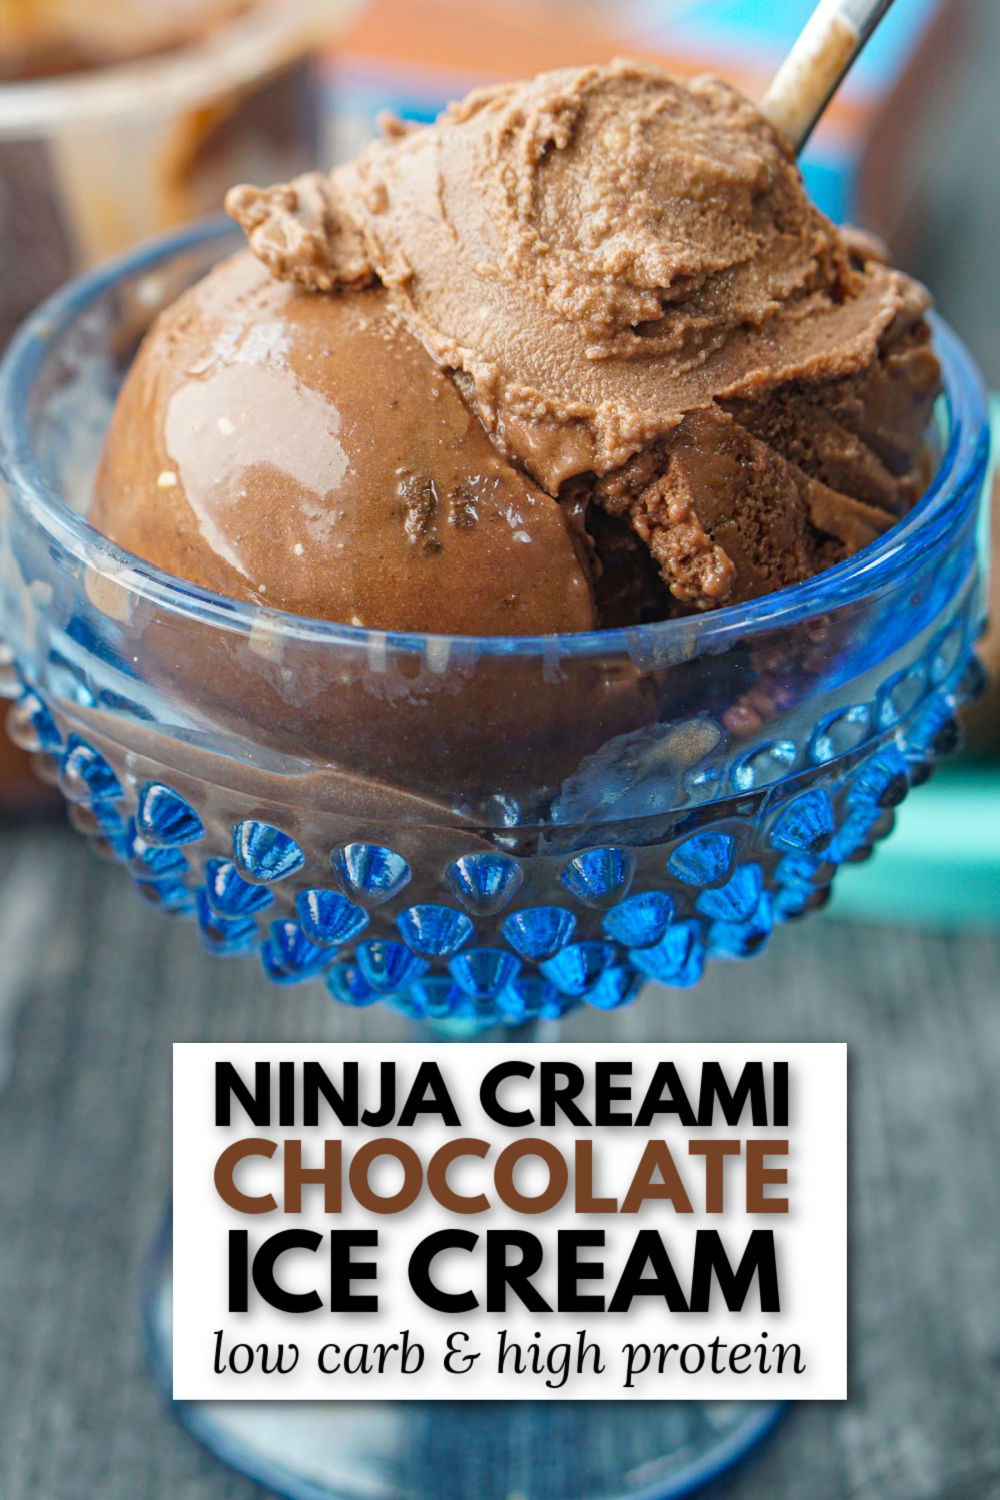 closeup of blue bowl with scoops of Ninja Creami chocolate ice cream and text